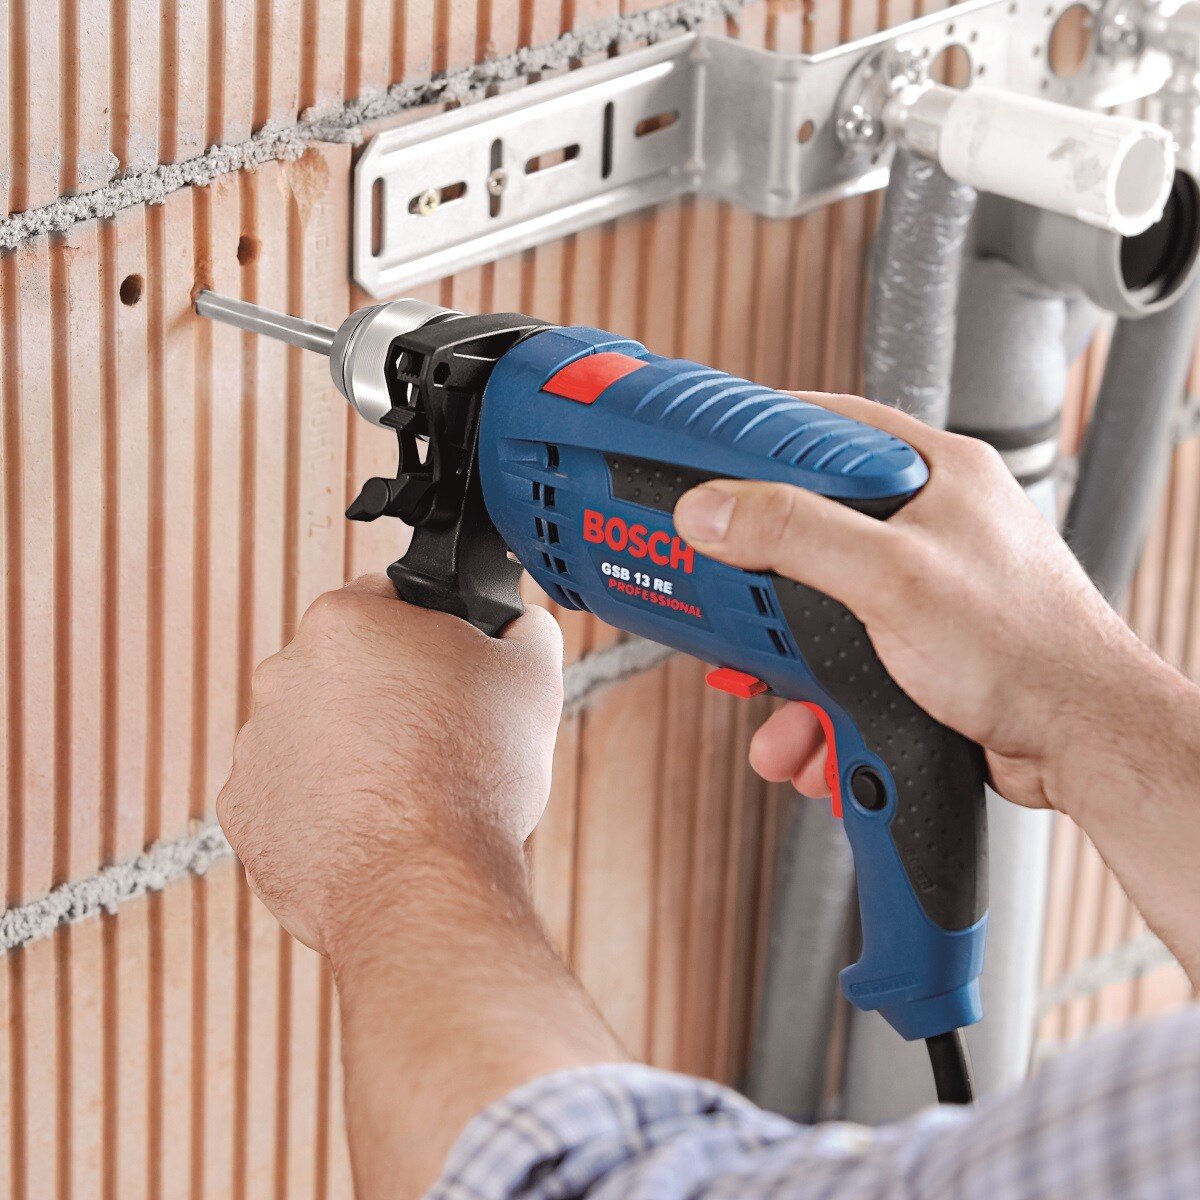 Bosch GSB 13 RE 13mm 600W Impact Drill from Lawson HIS